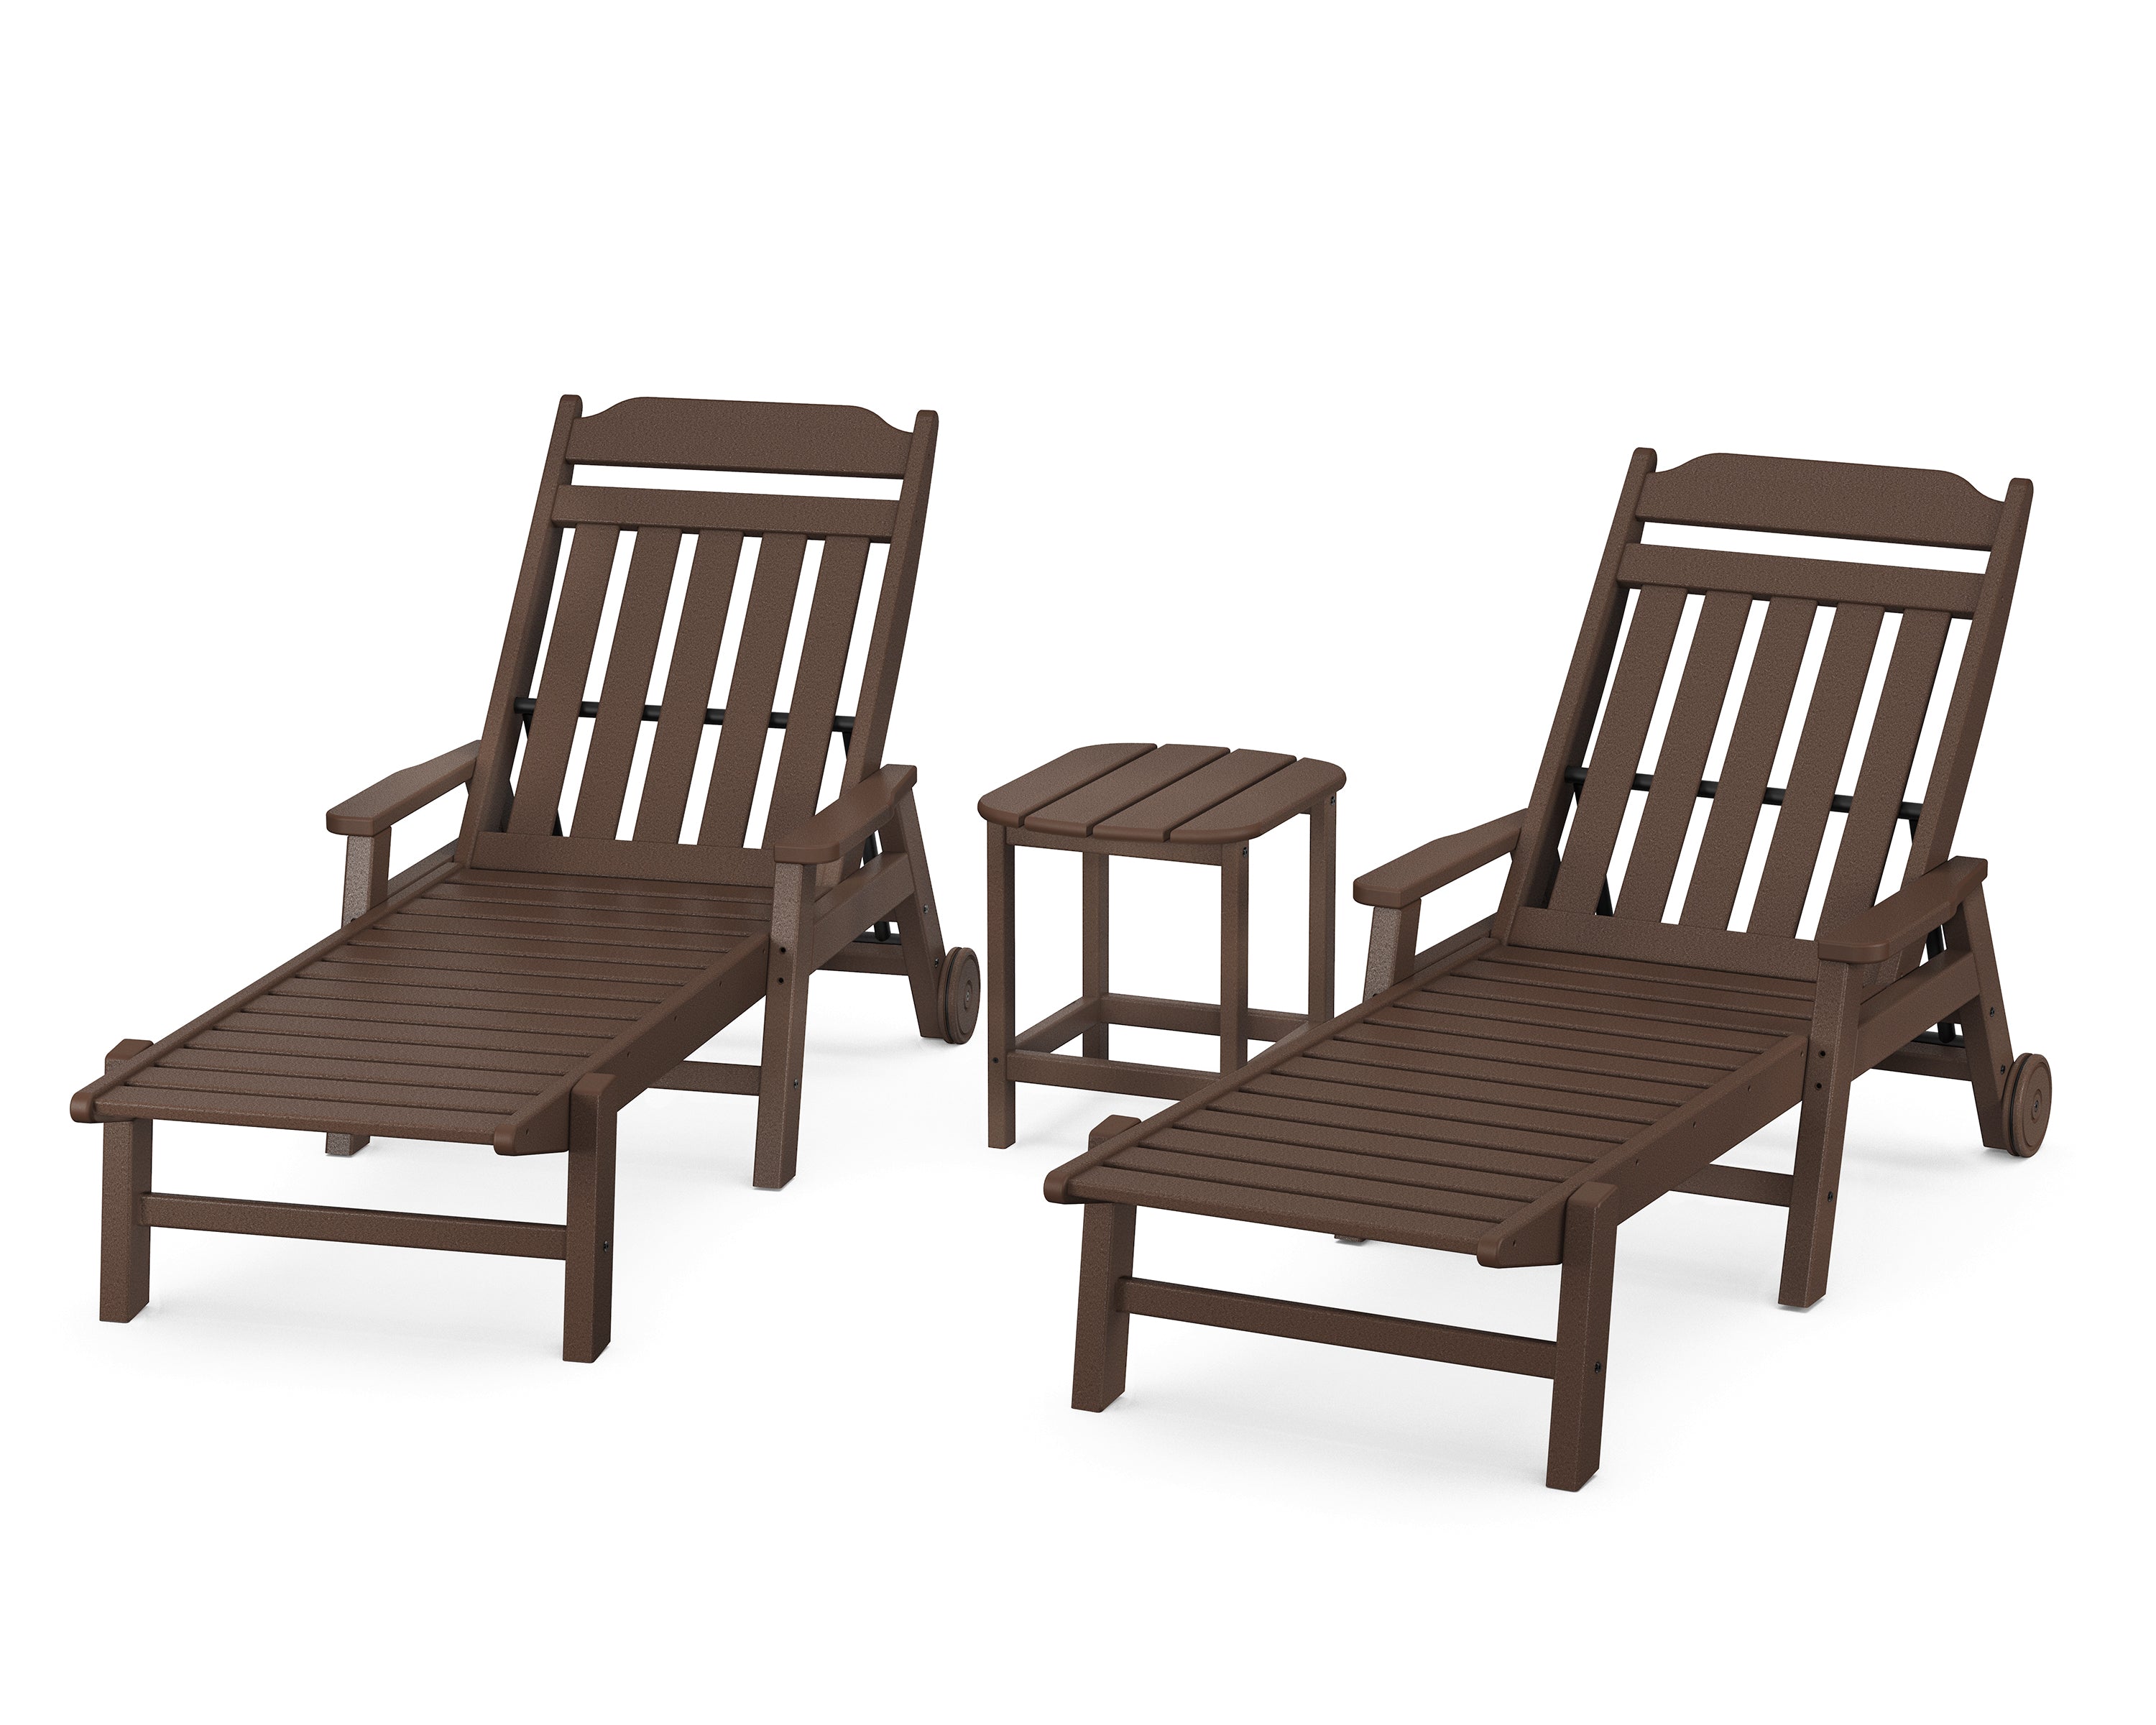 POLYWOOD Country Living 3-Piece Chaise Set with Arms and Wheels in Mahogany